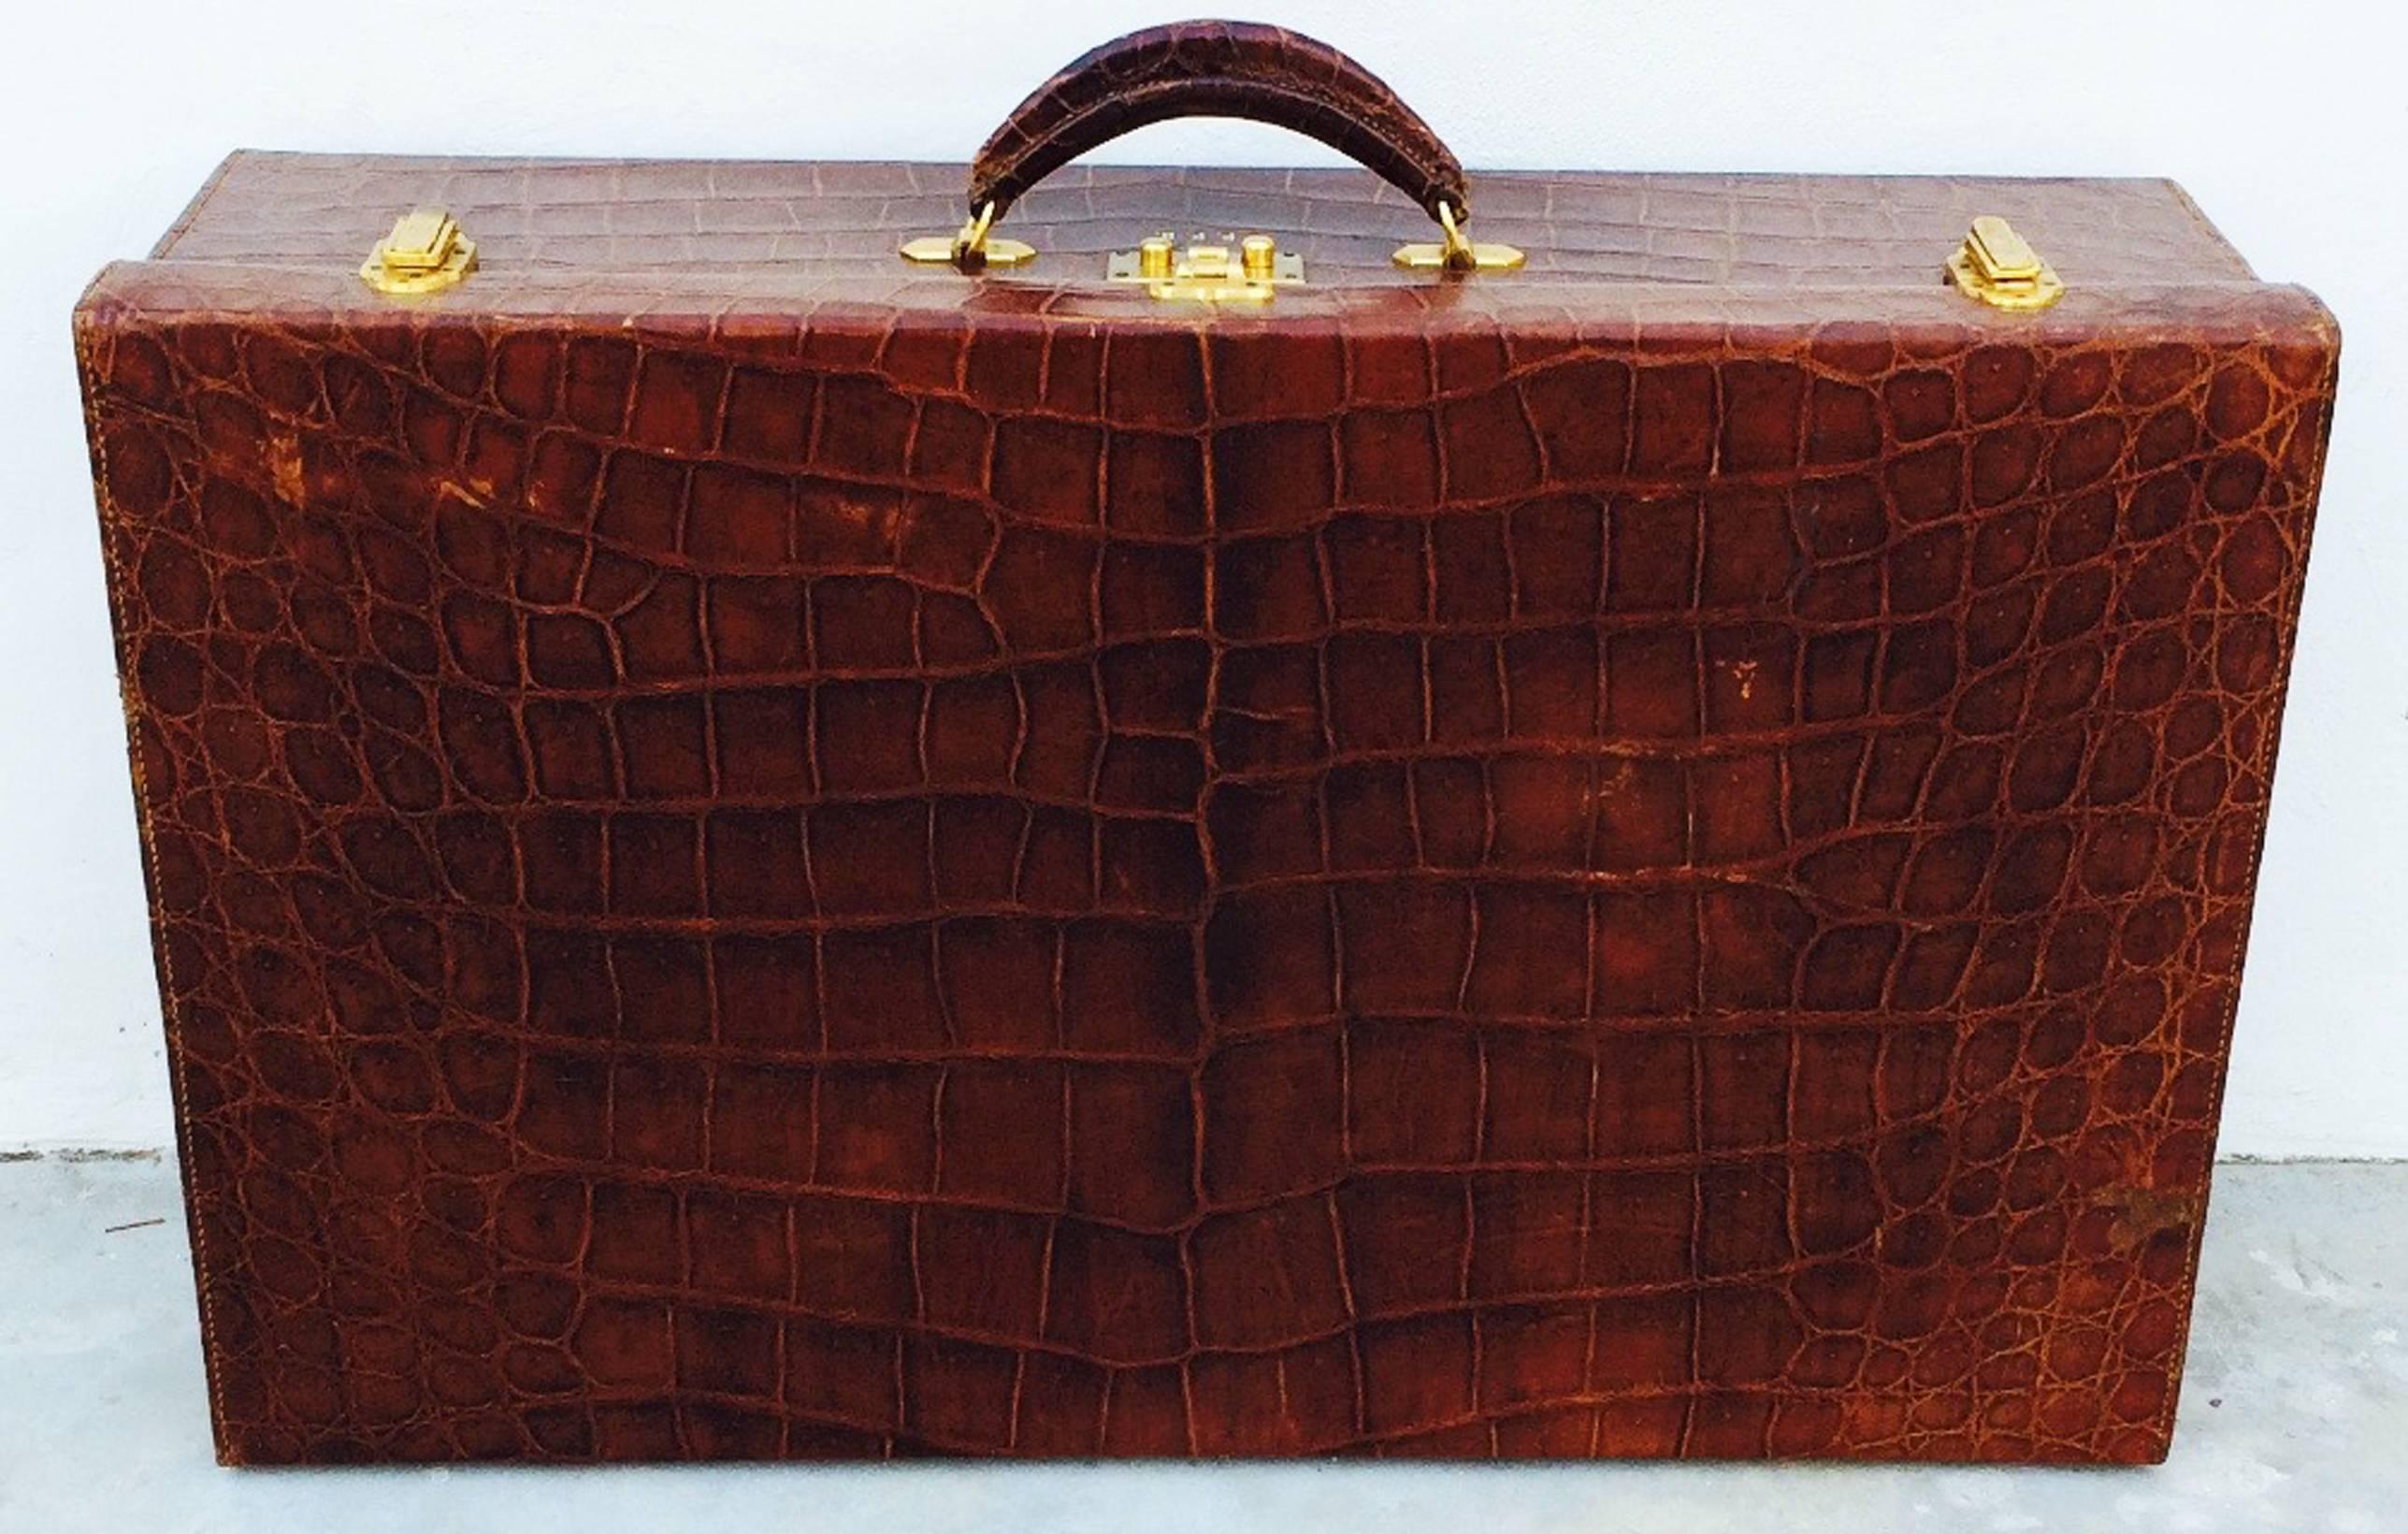 A extremely rare Hermes crocodile travel case/suitcase. Exquisite seldom seen item features matched skins exterior with original gilt gold hardware and glides (no key). Item retains original finish with a few random scuff marks etc. Corners and